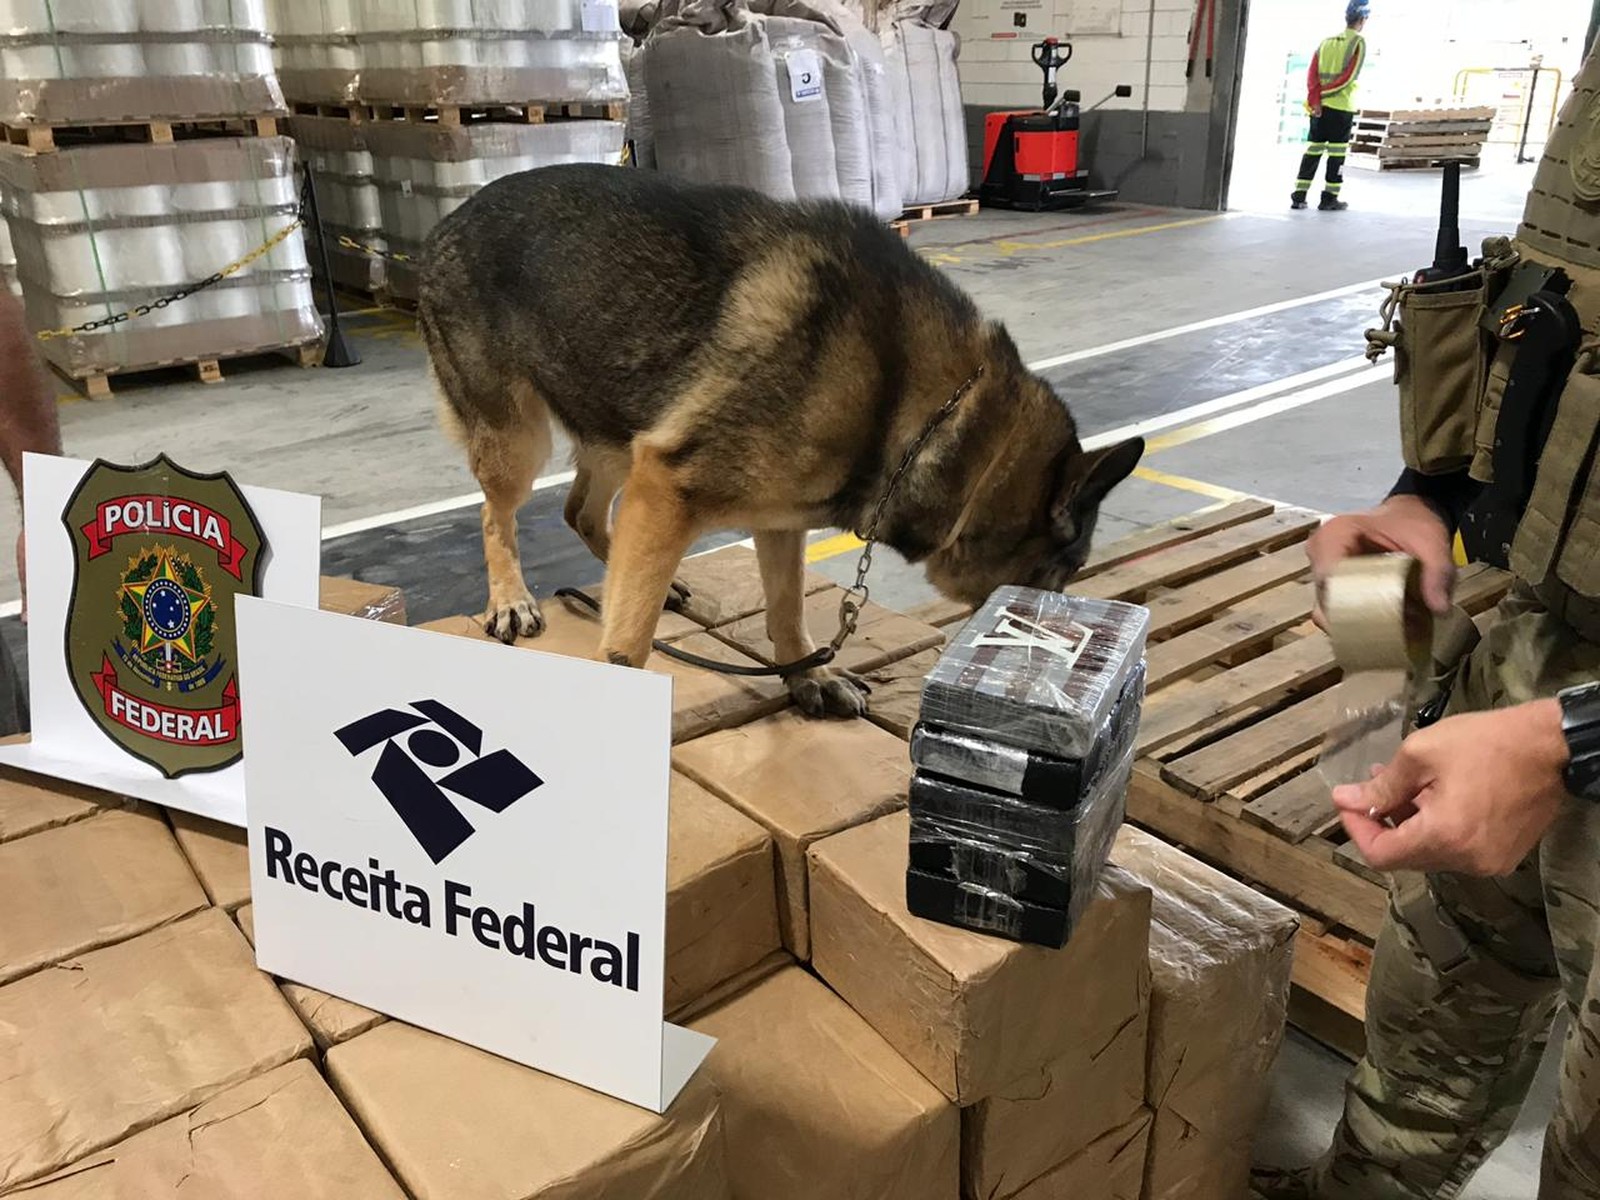 Besides appropriate equipment, the Federal Treasury also relies on sniffer dogs to find and seize drugs.